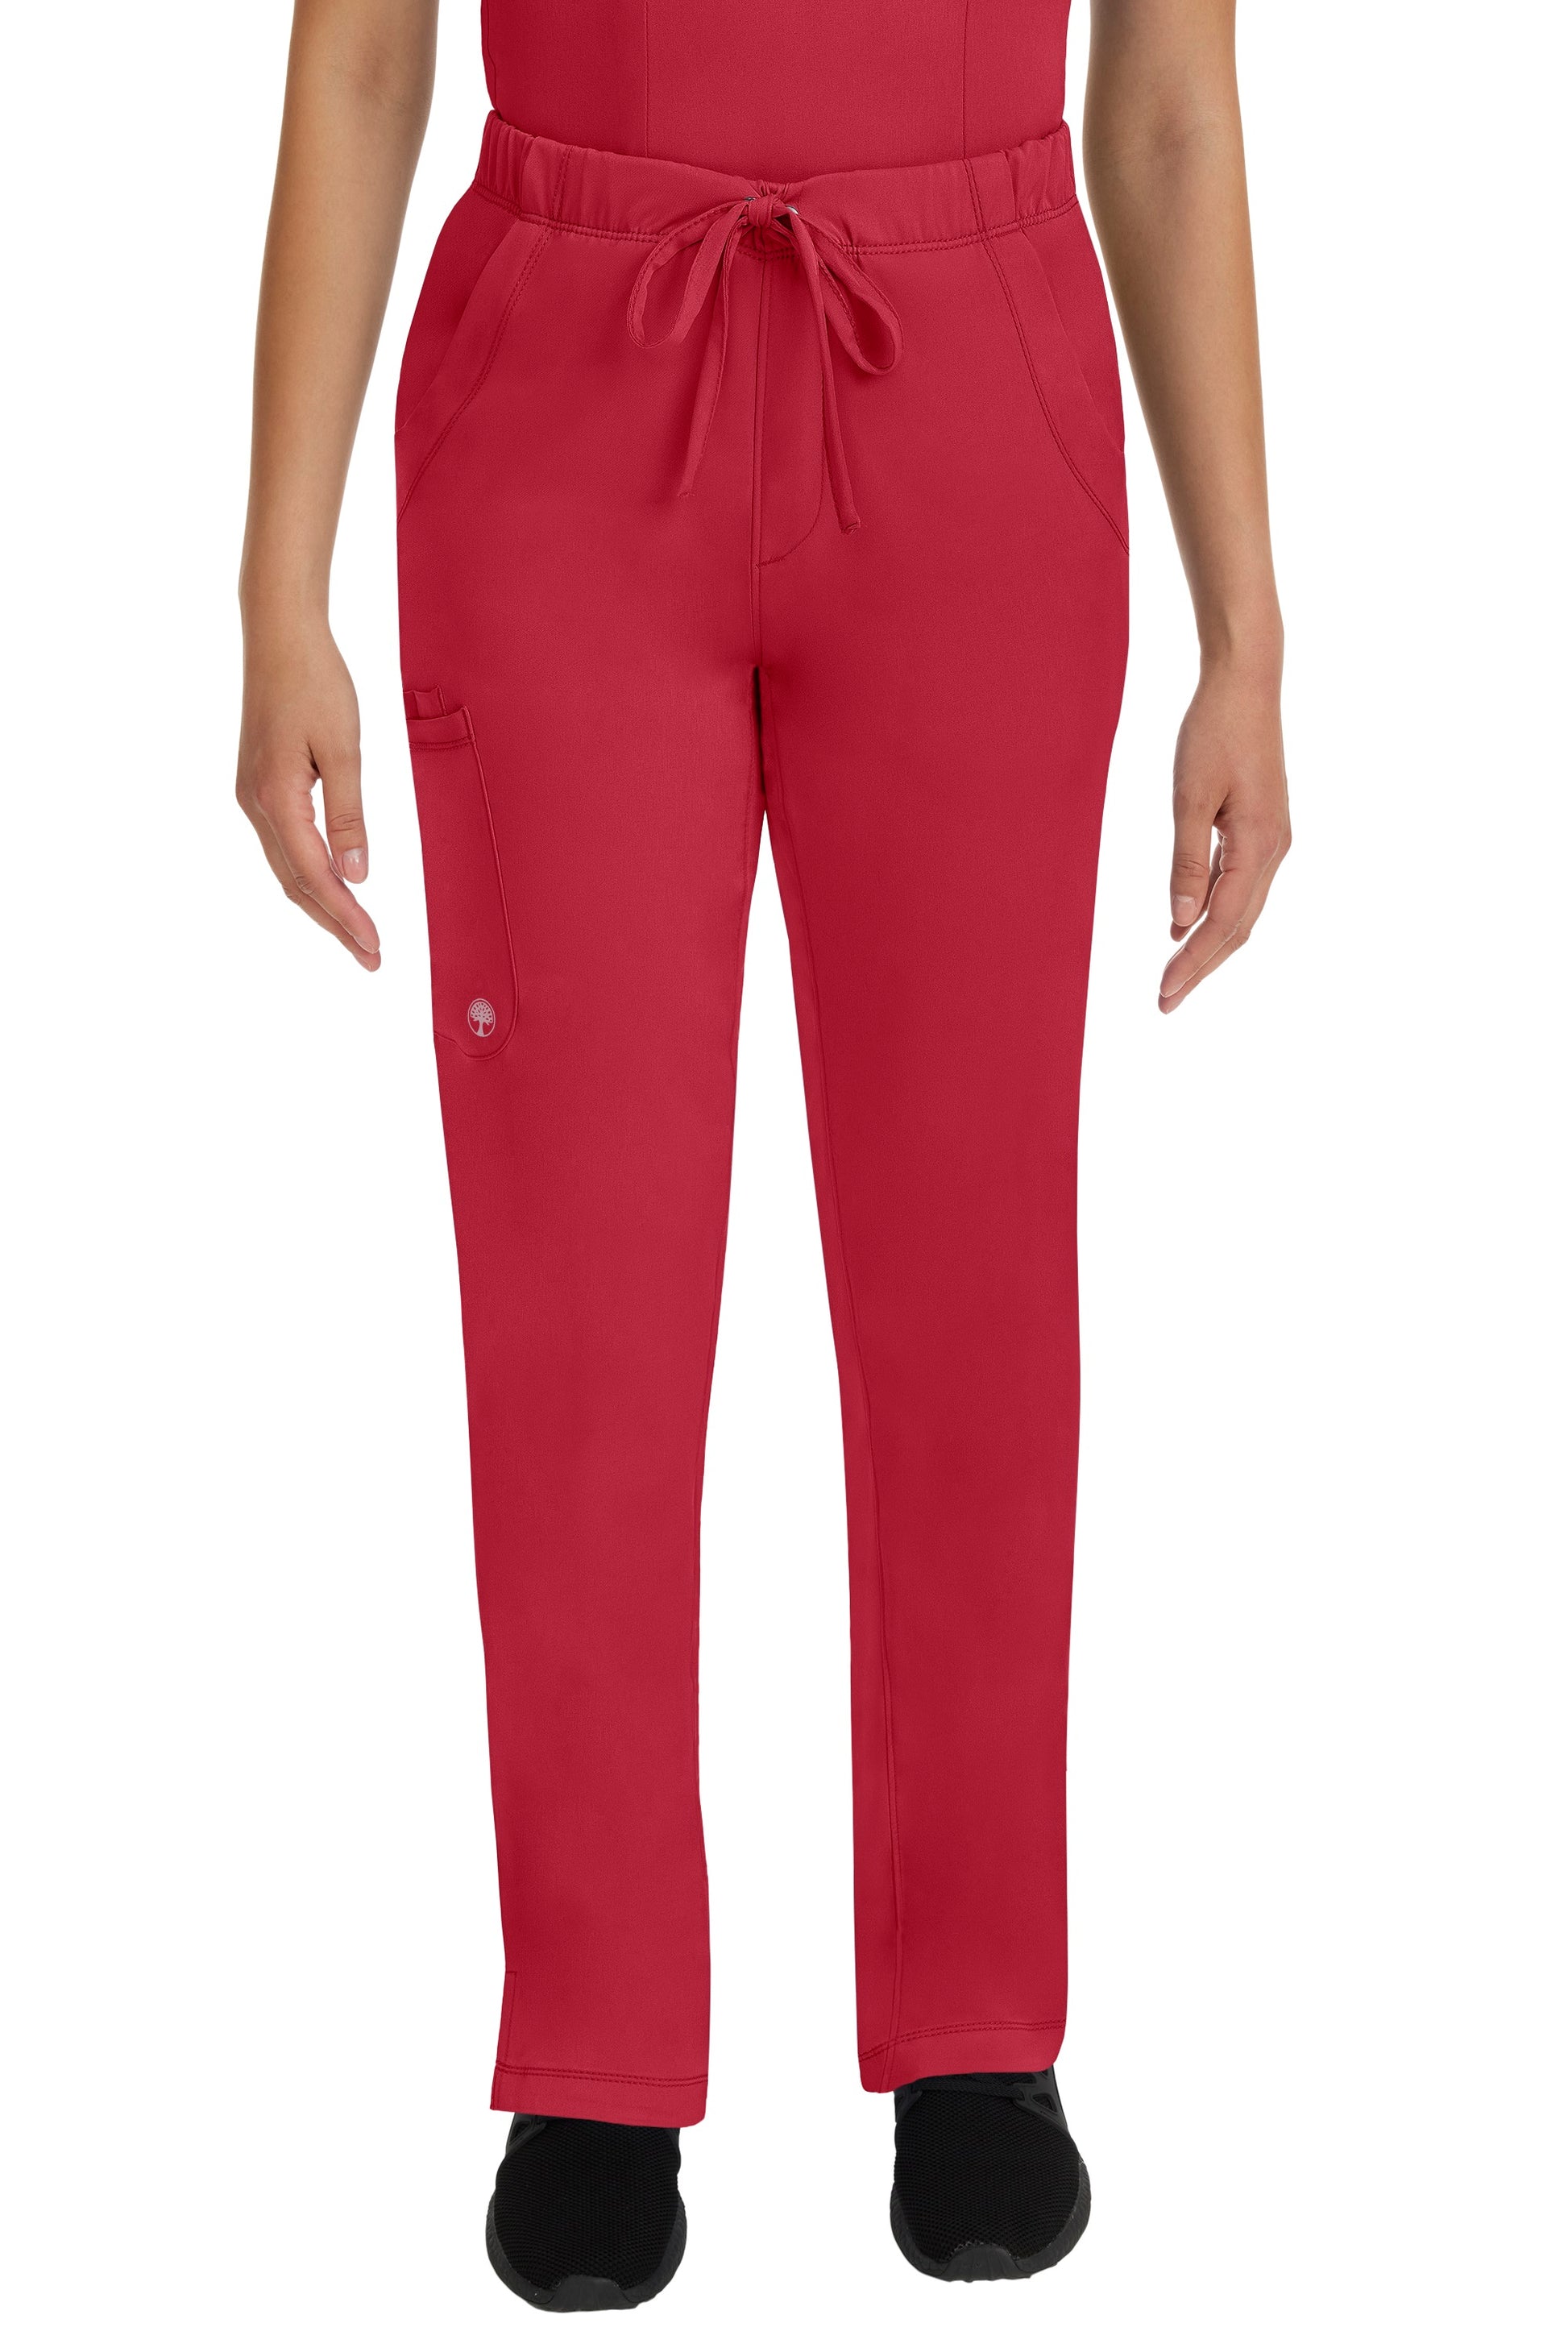 Healing Hands Scrubs HH Works Rebecca Petite Scrub Pant in Red at Parker's Clothing and Shoes.